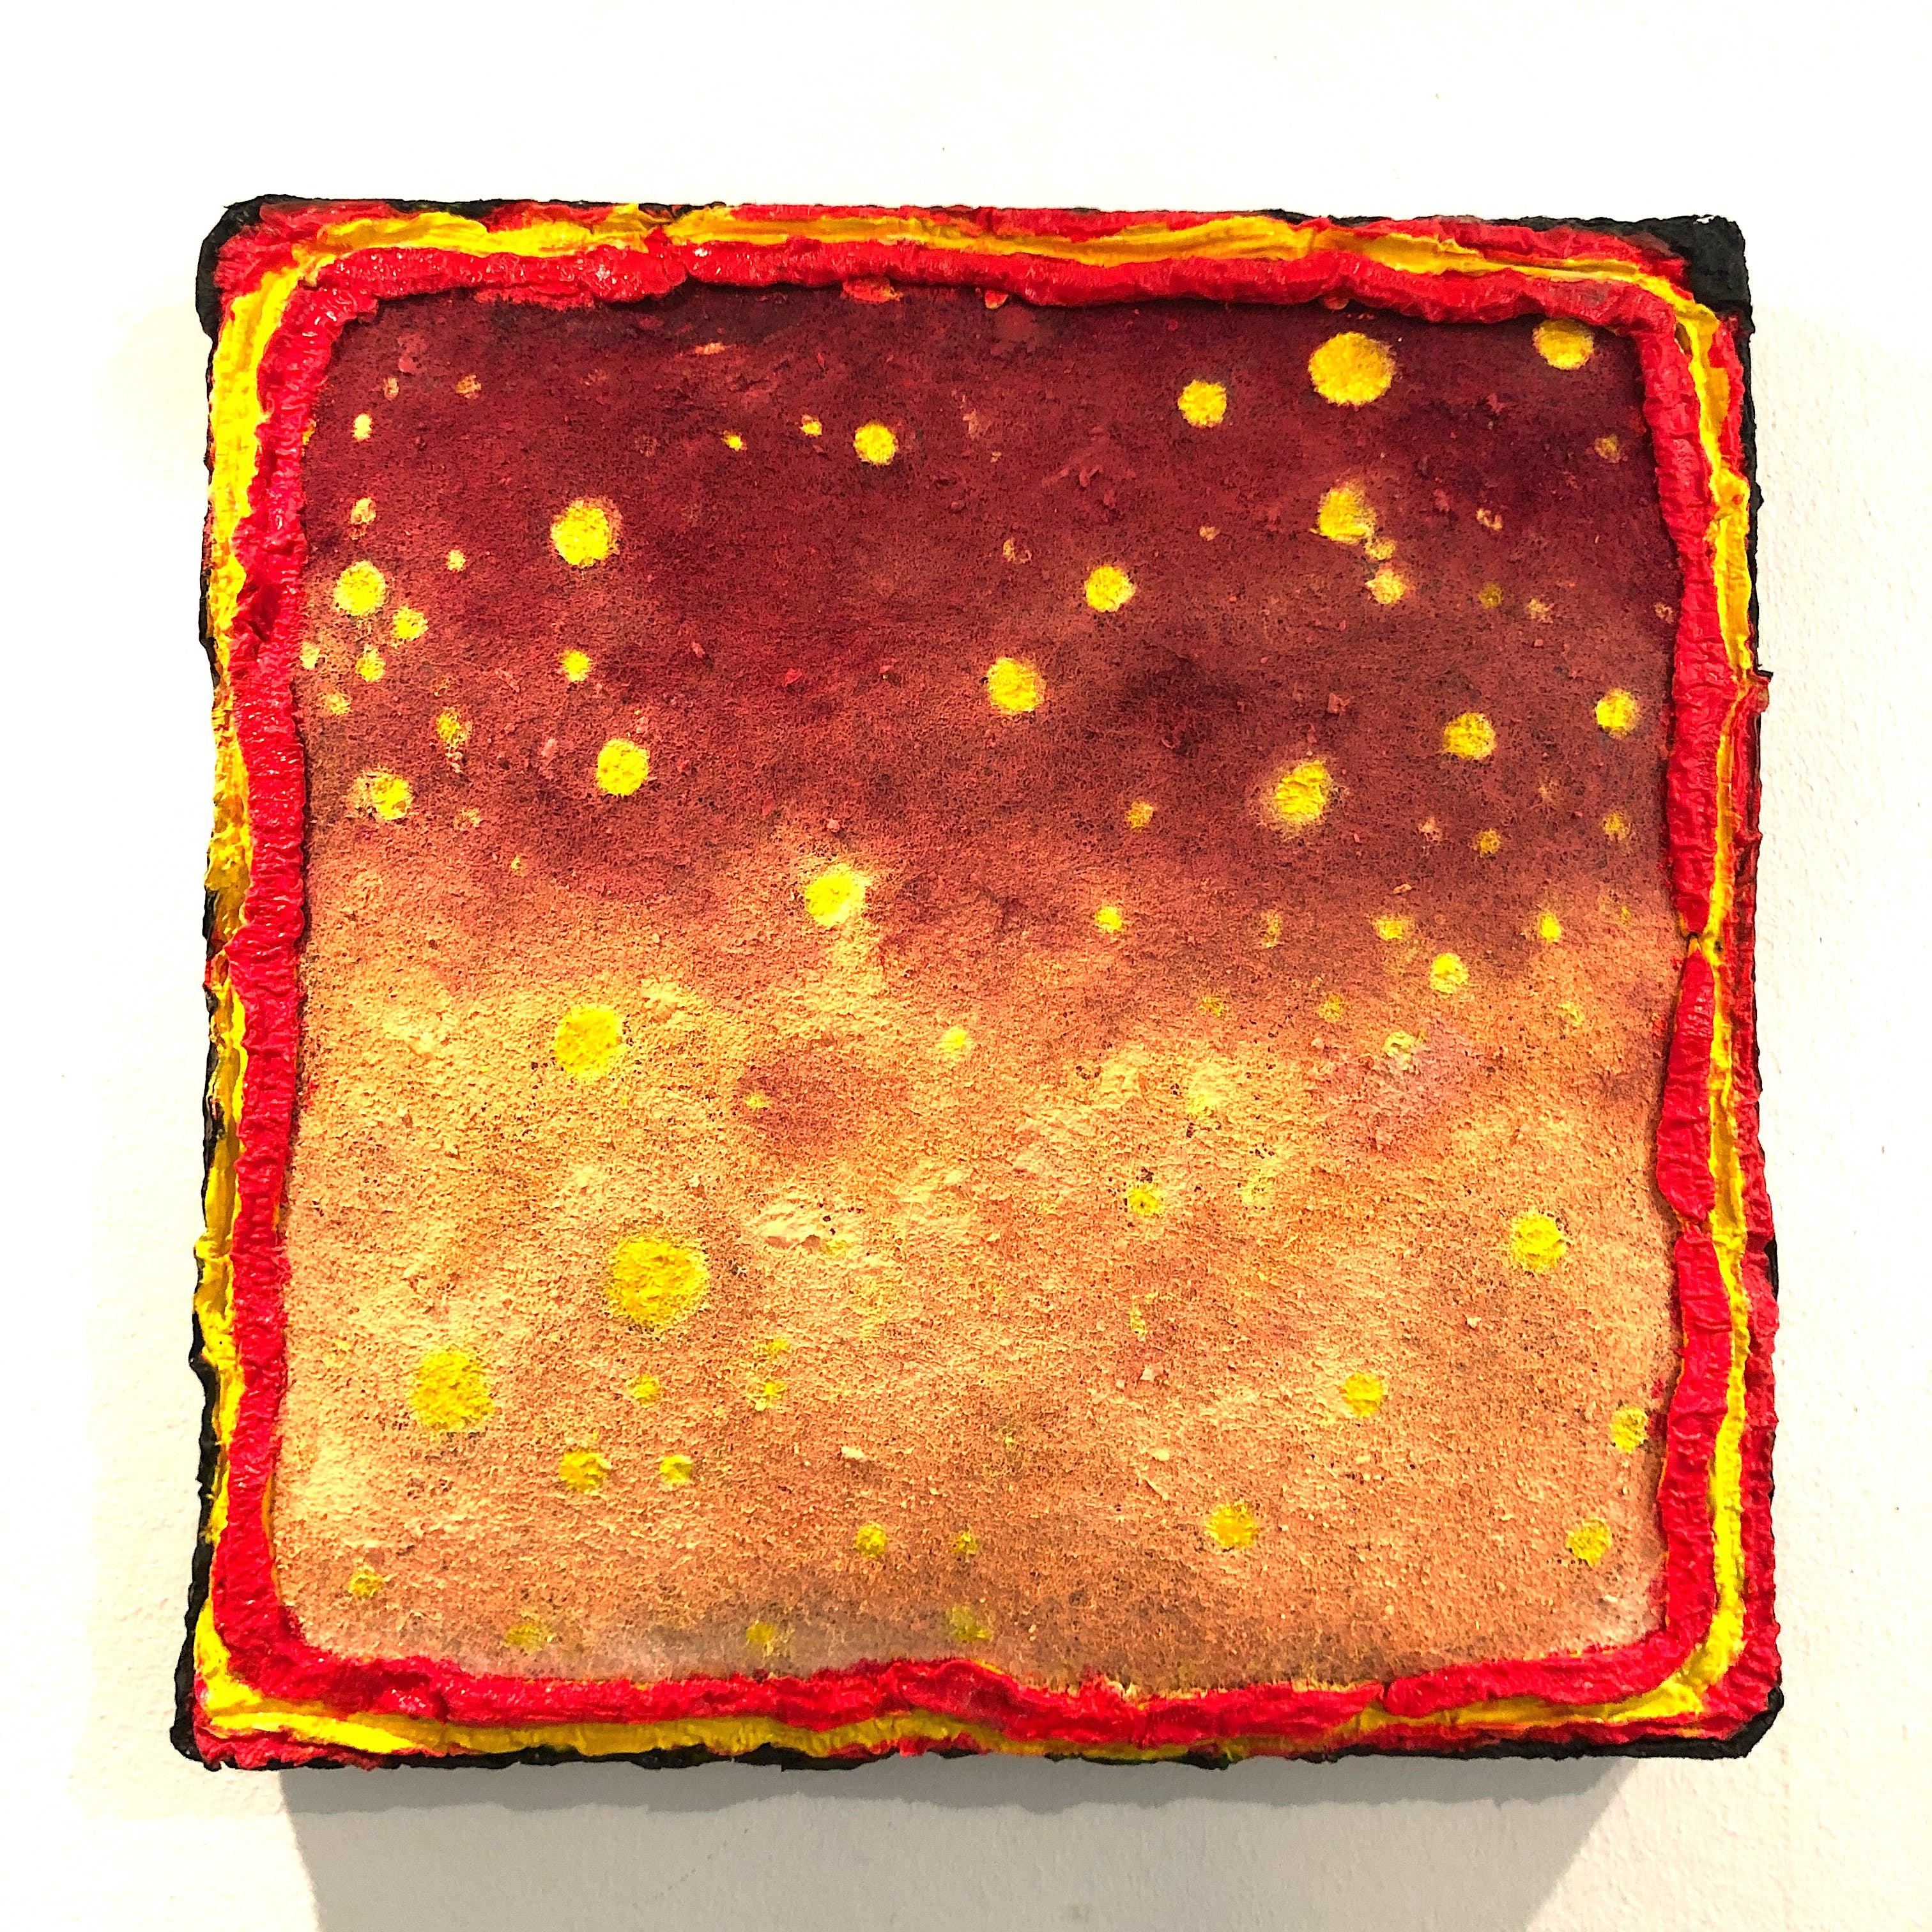 Twisted Stars IV - Contemporary, Oil on Felt, Night Sky, Stars, 21st C., Pink - Painting by Edie Monetti